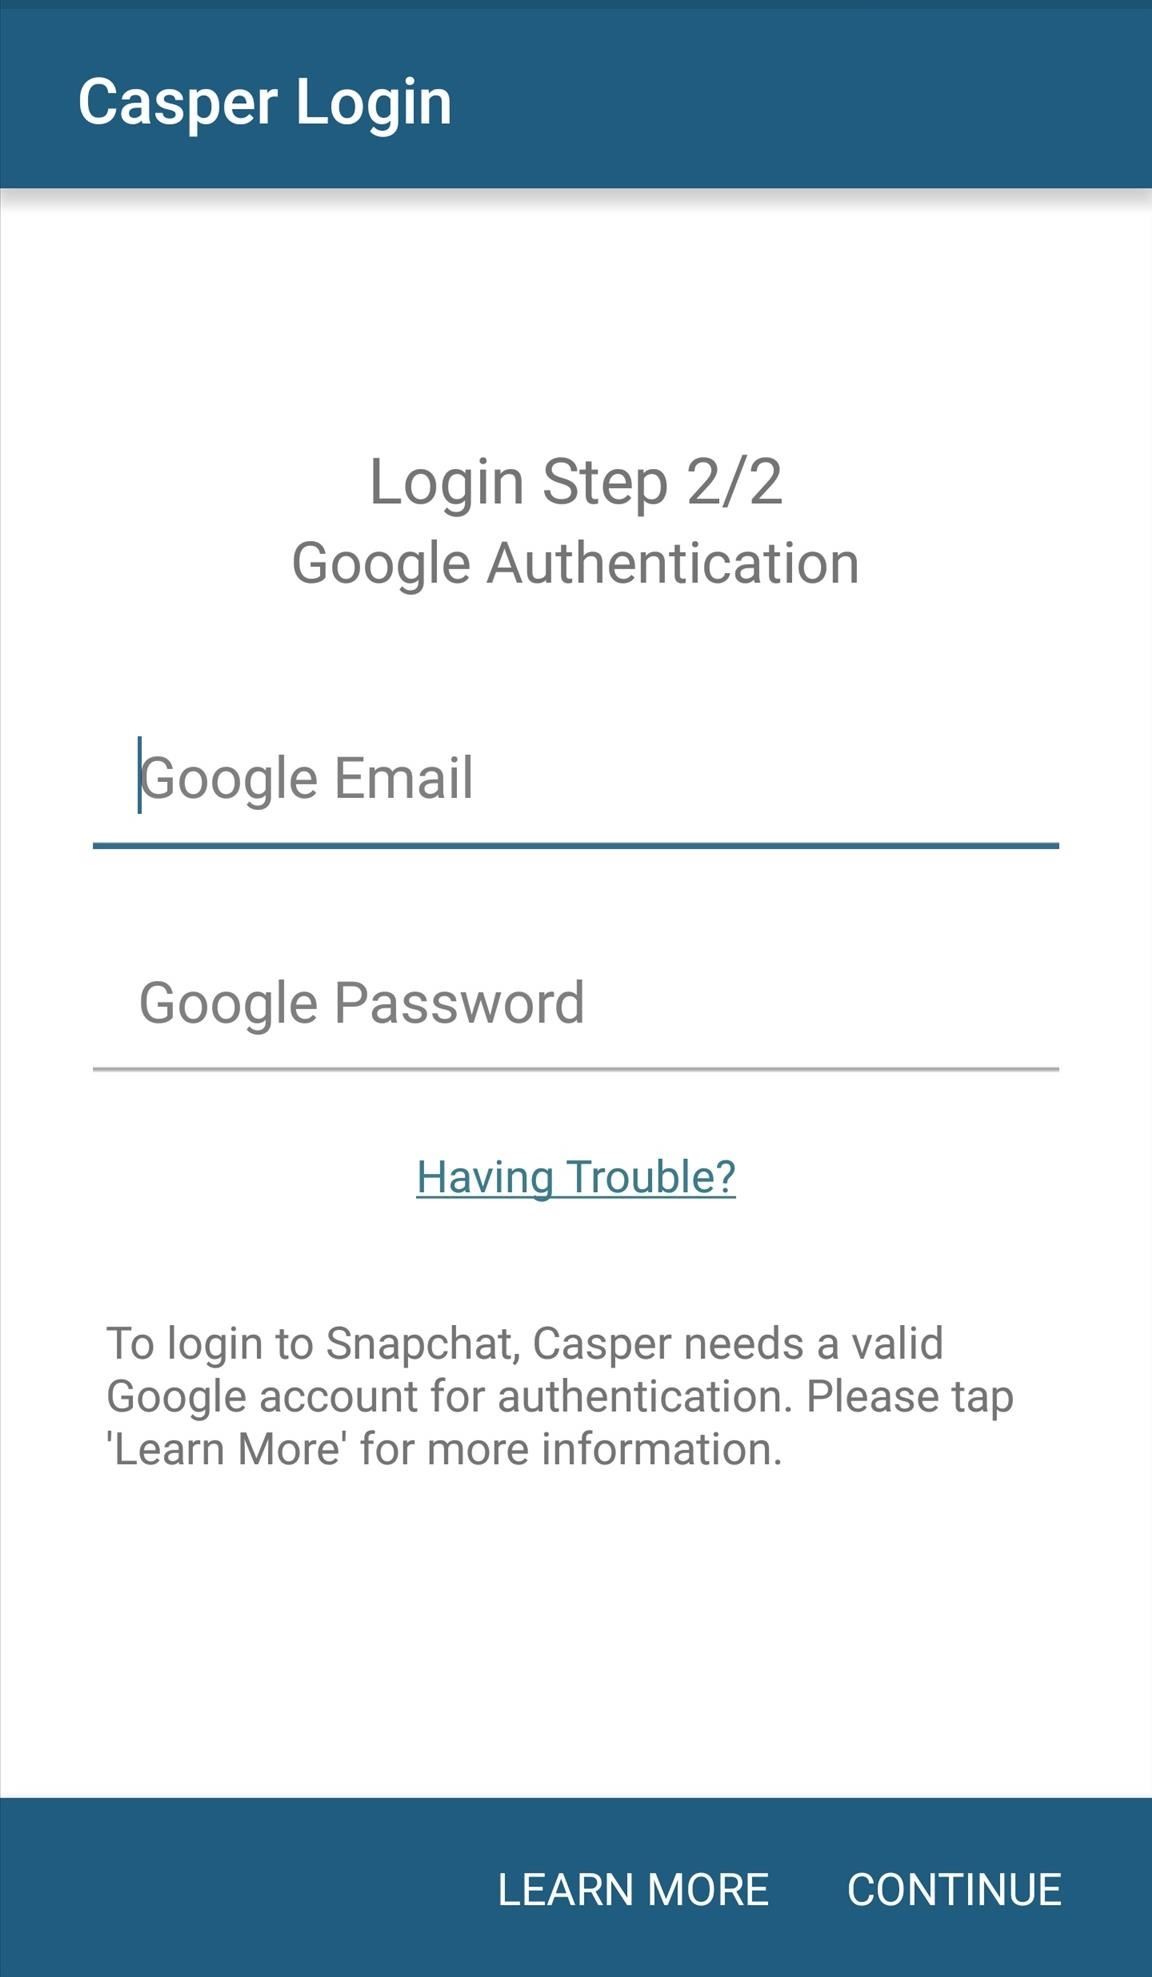 How to Save Snapchats on Android Undetected (No Root Needed)